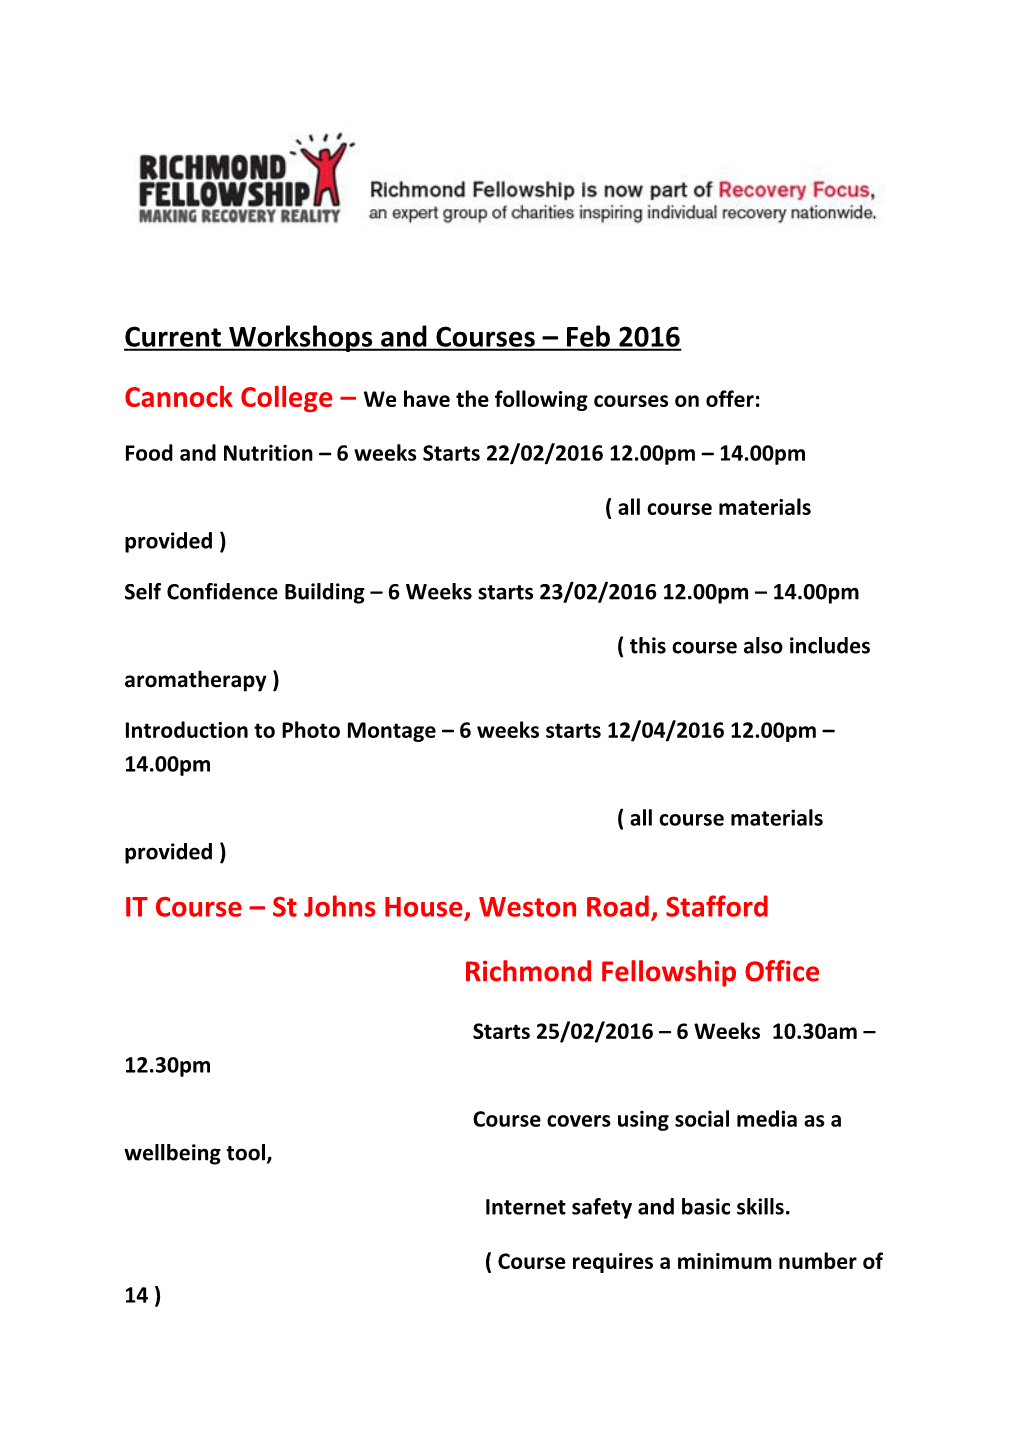 Cannock College We Have the Following Courses on Offer